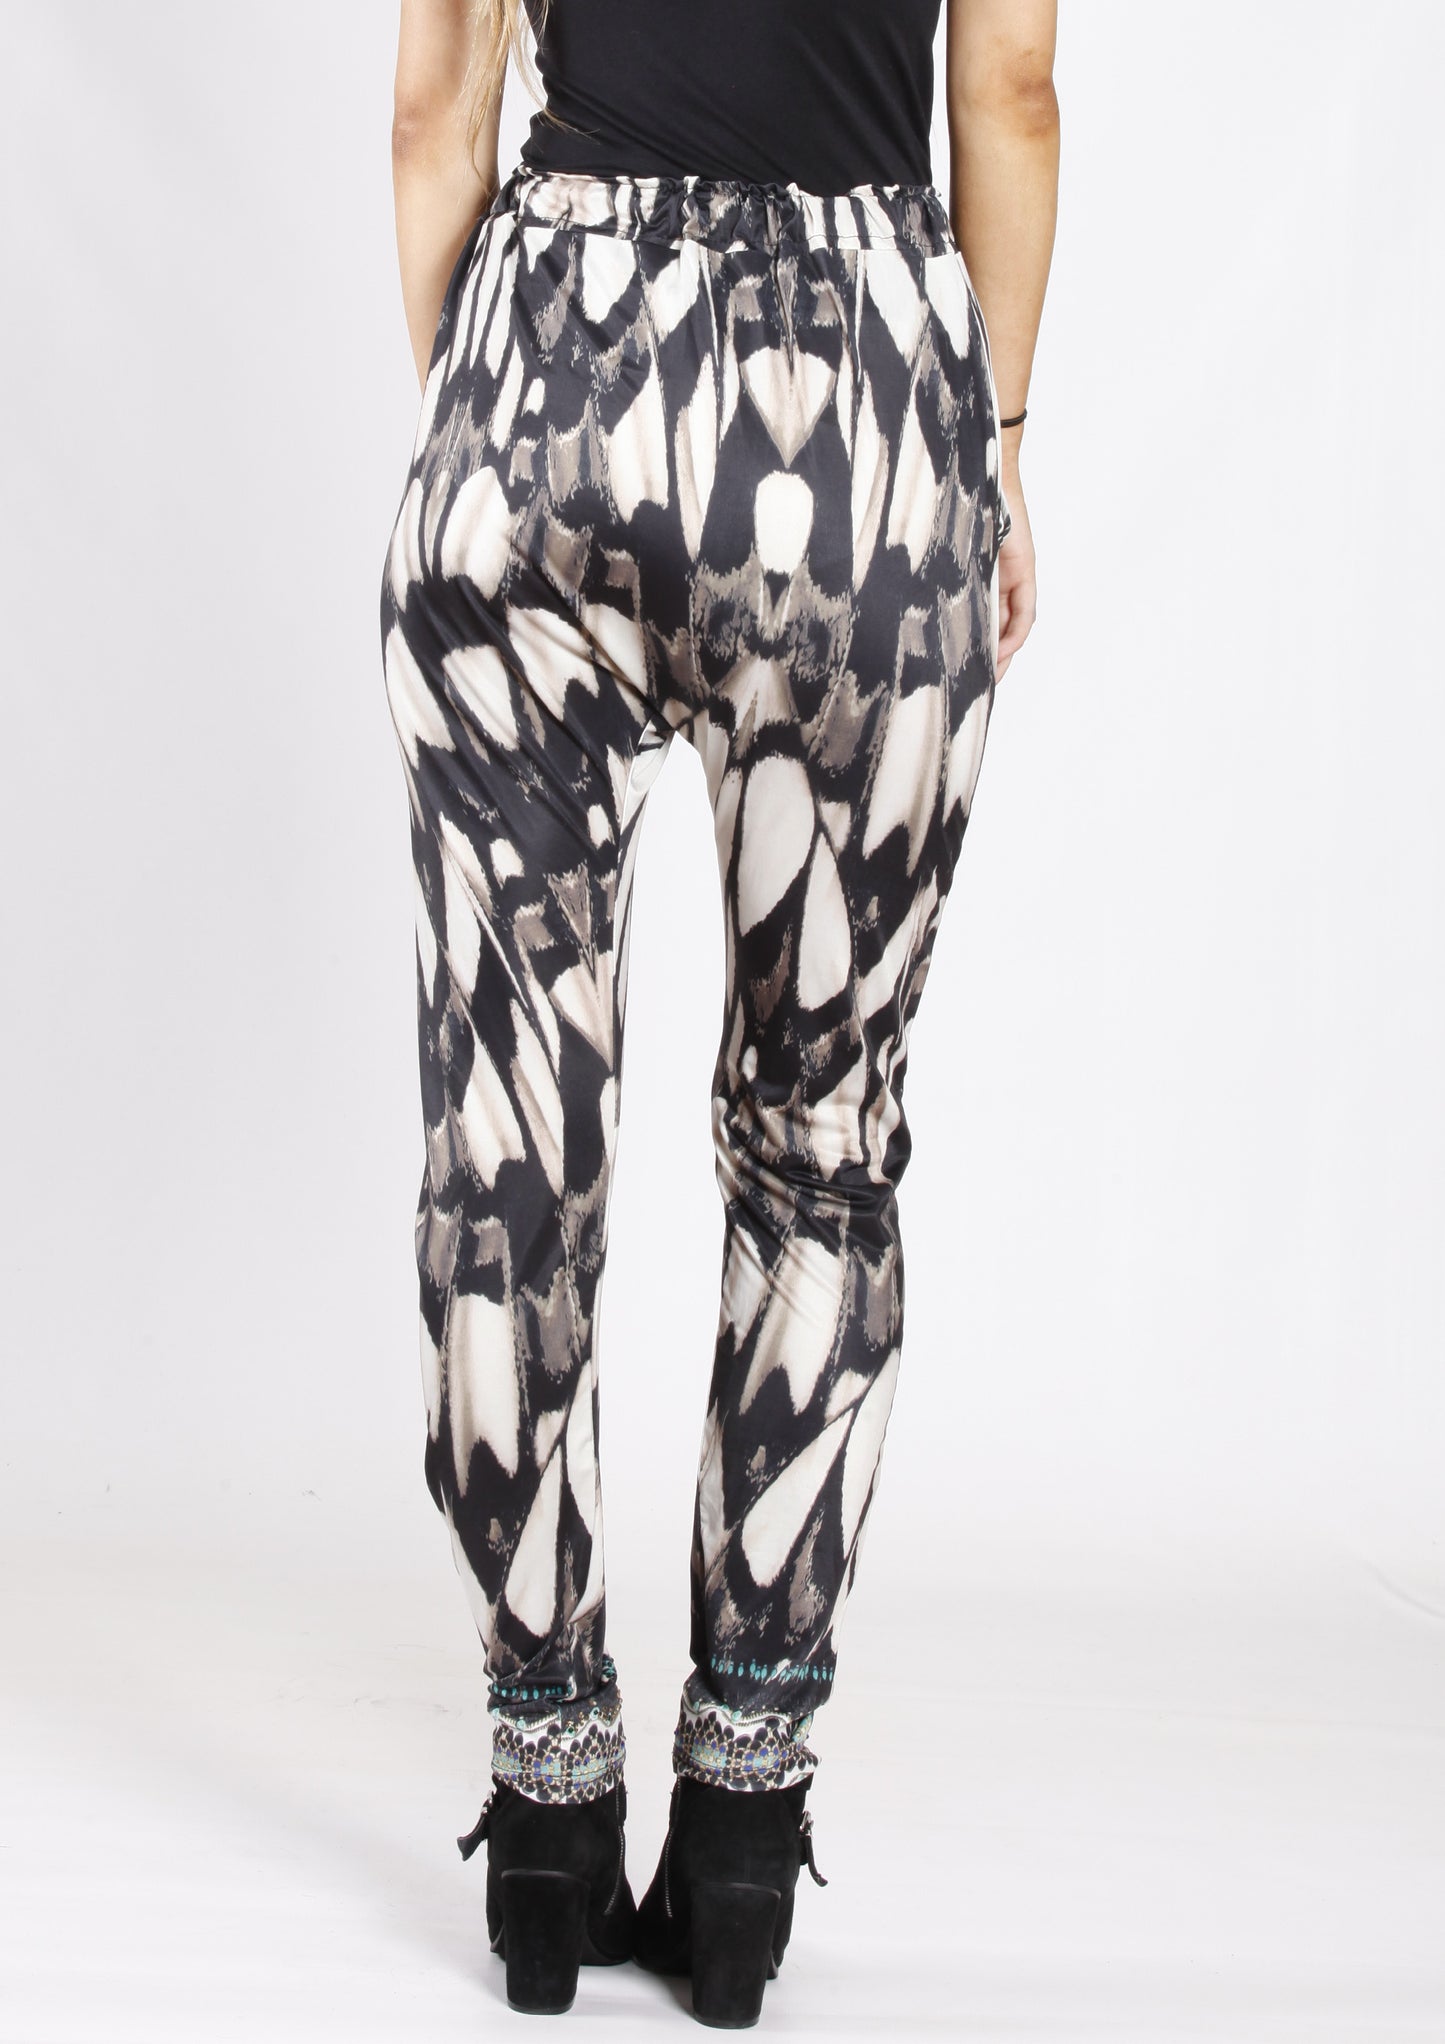 VY00218SS Printed Drop Crotch Pant (Pack)